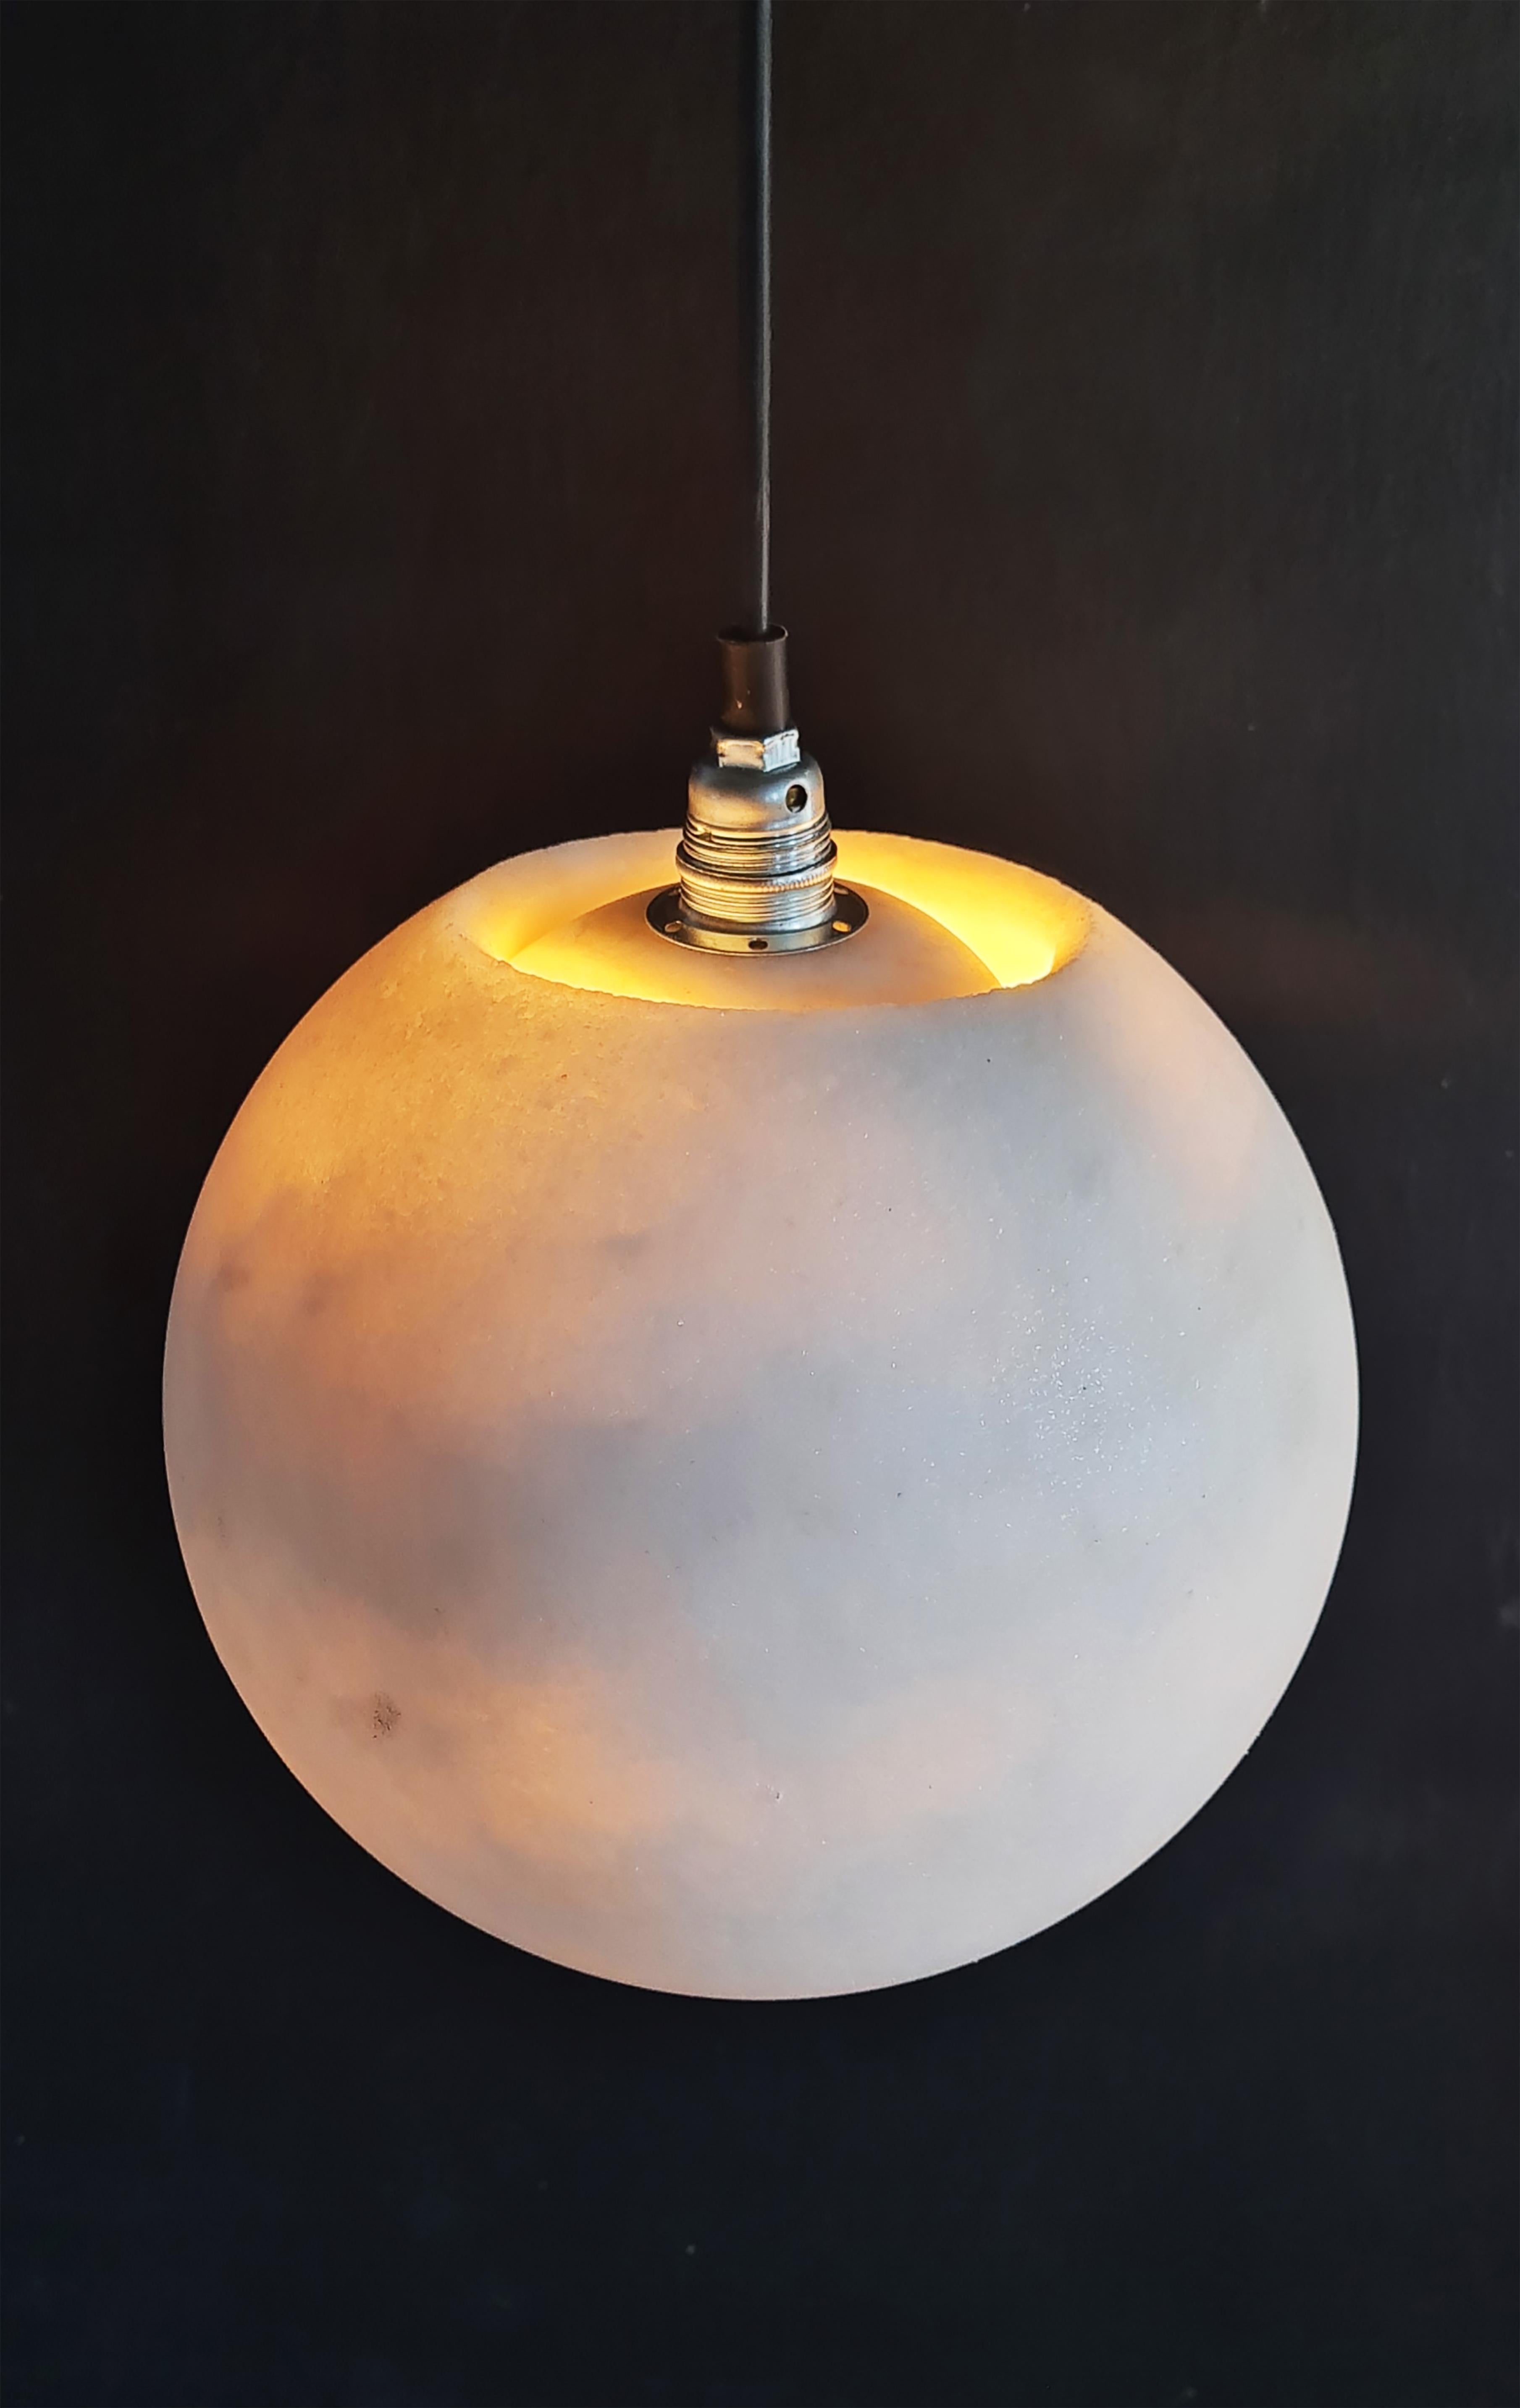 Planet Lamp by Roxane Lahidji
Dimensions: D 25 x H 25 cm
Material: Marbled salts
A unique award-winning technique developed by Roxane Lahidji

Award winner of Bolia Design Awards 2019 and FD100 and present in the collections of the Design Museum